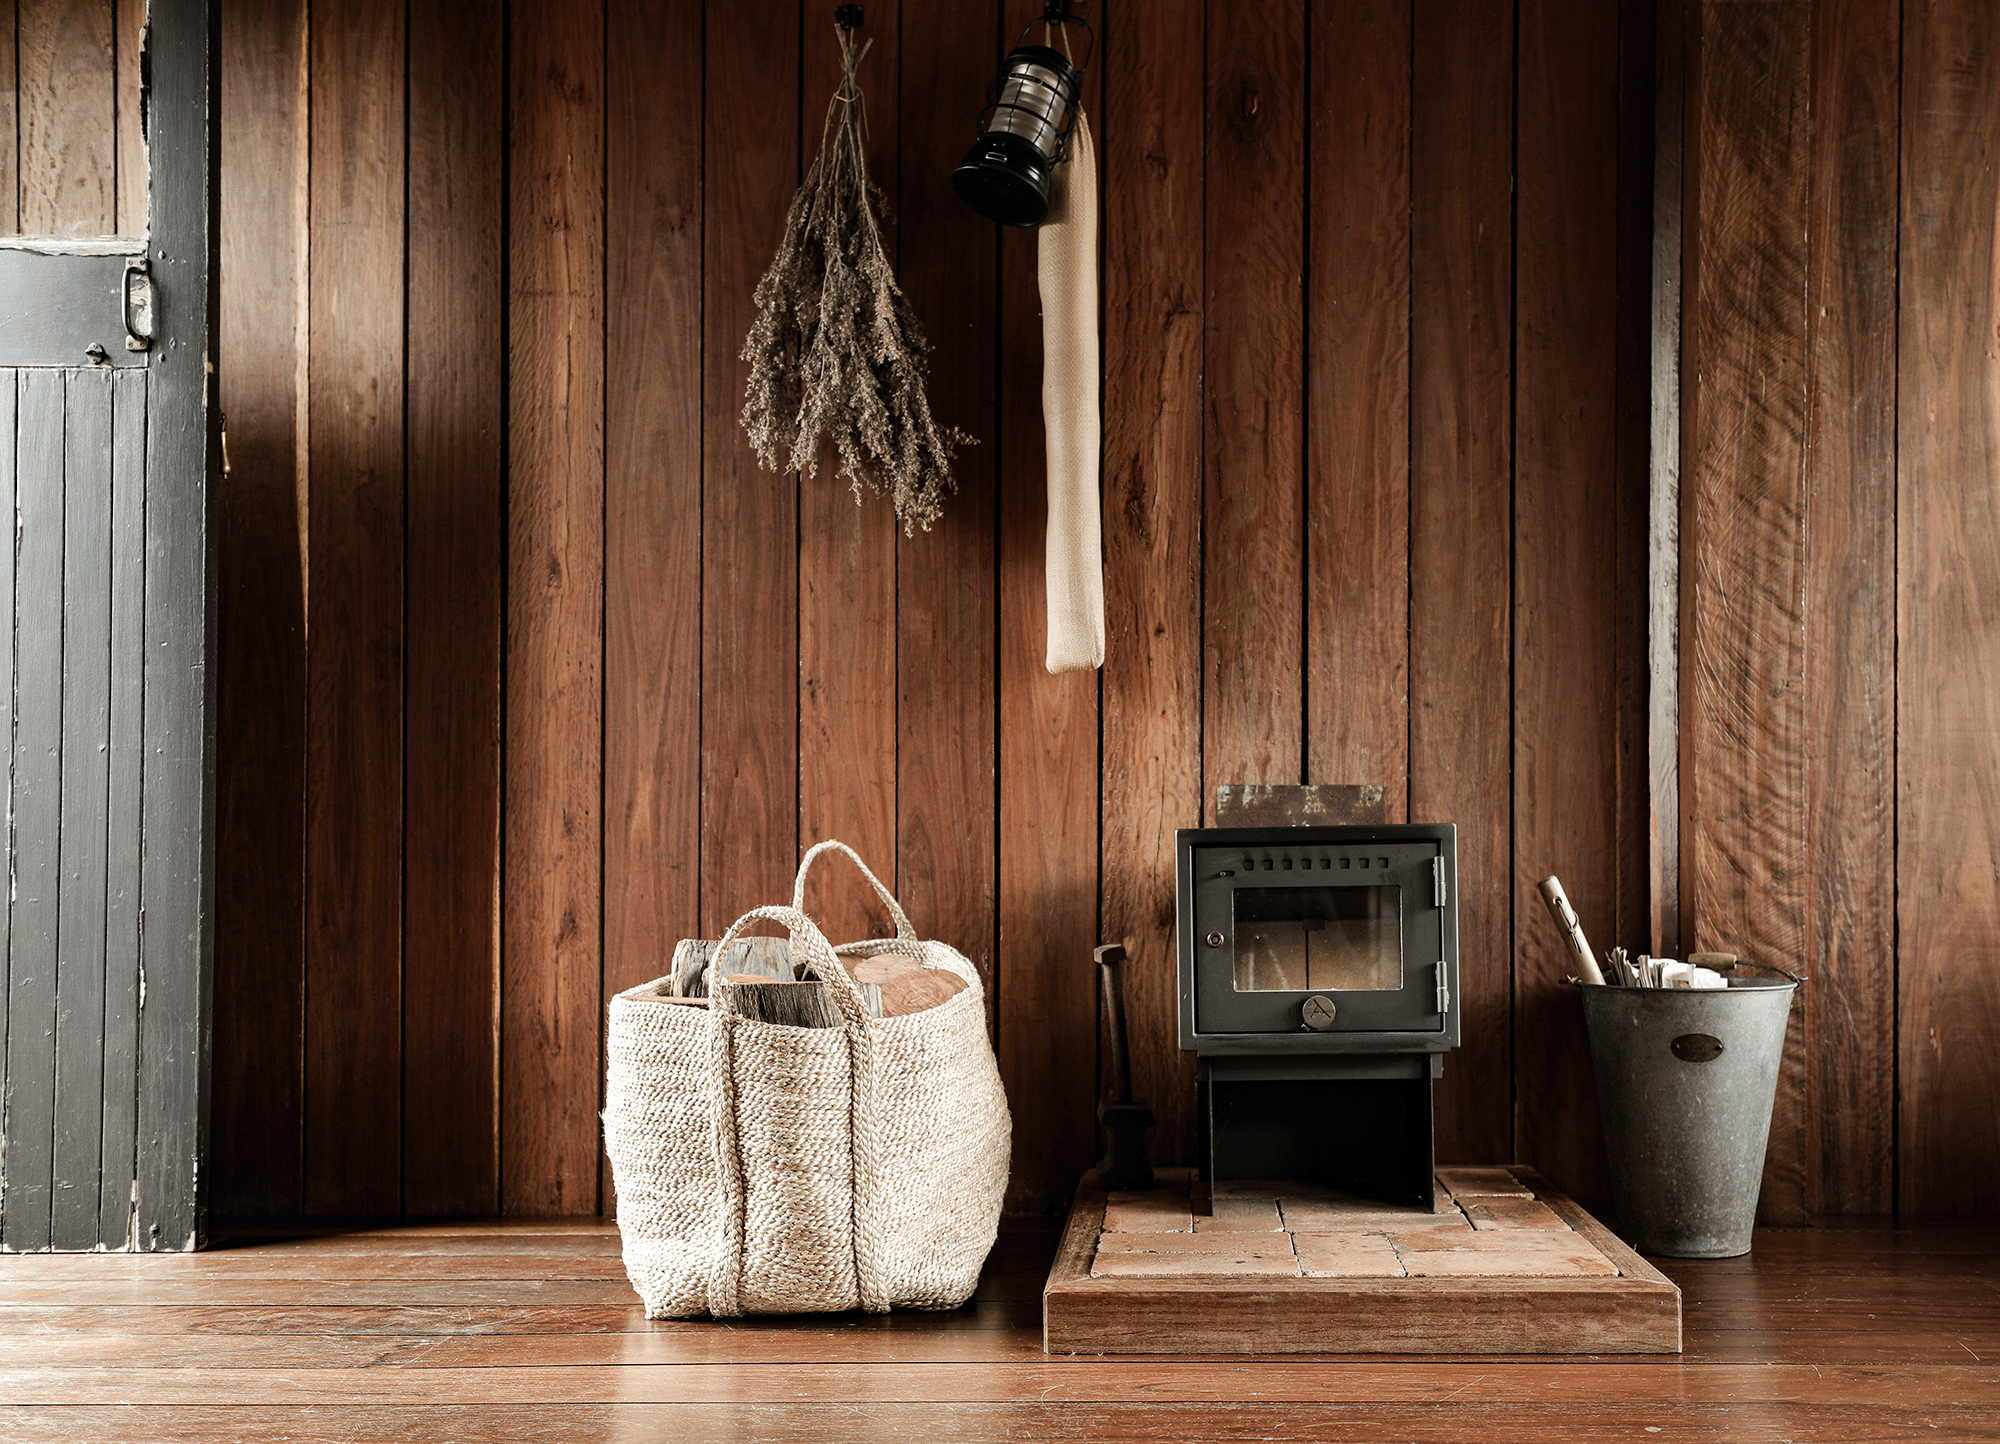 Bloodwood Cabin interior rustic fireplace jute basket with firewood